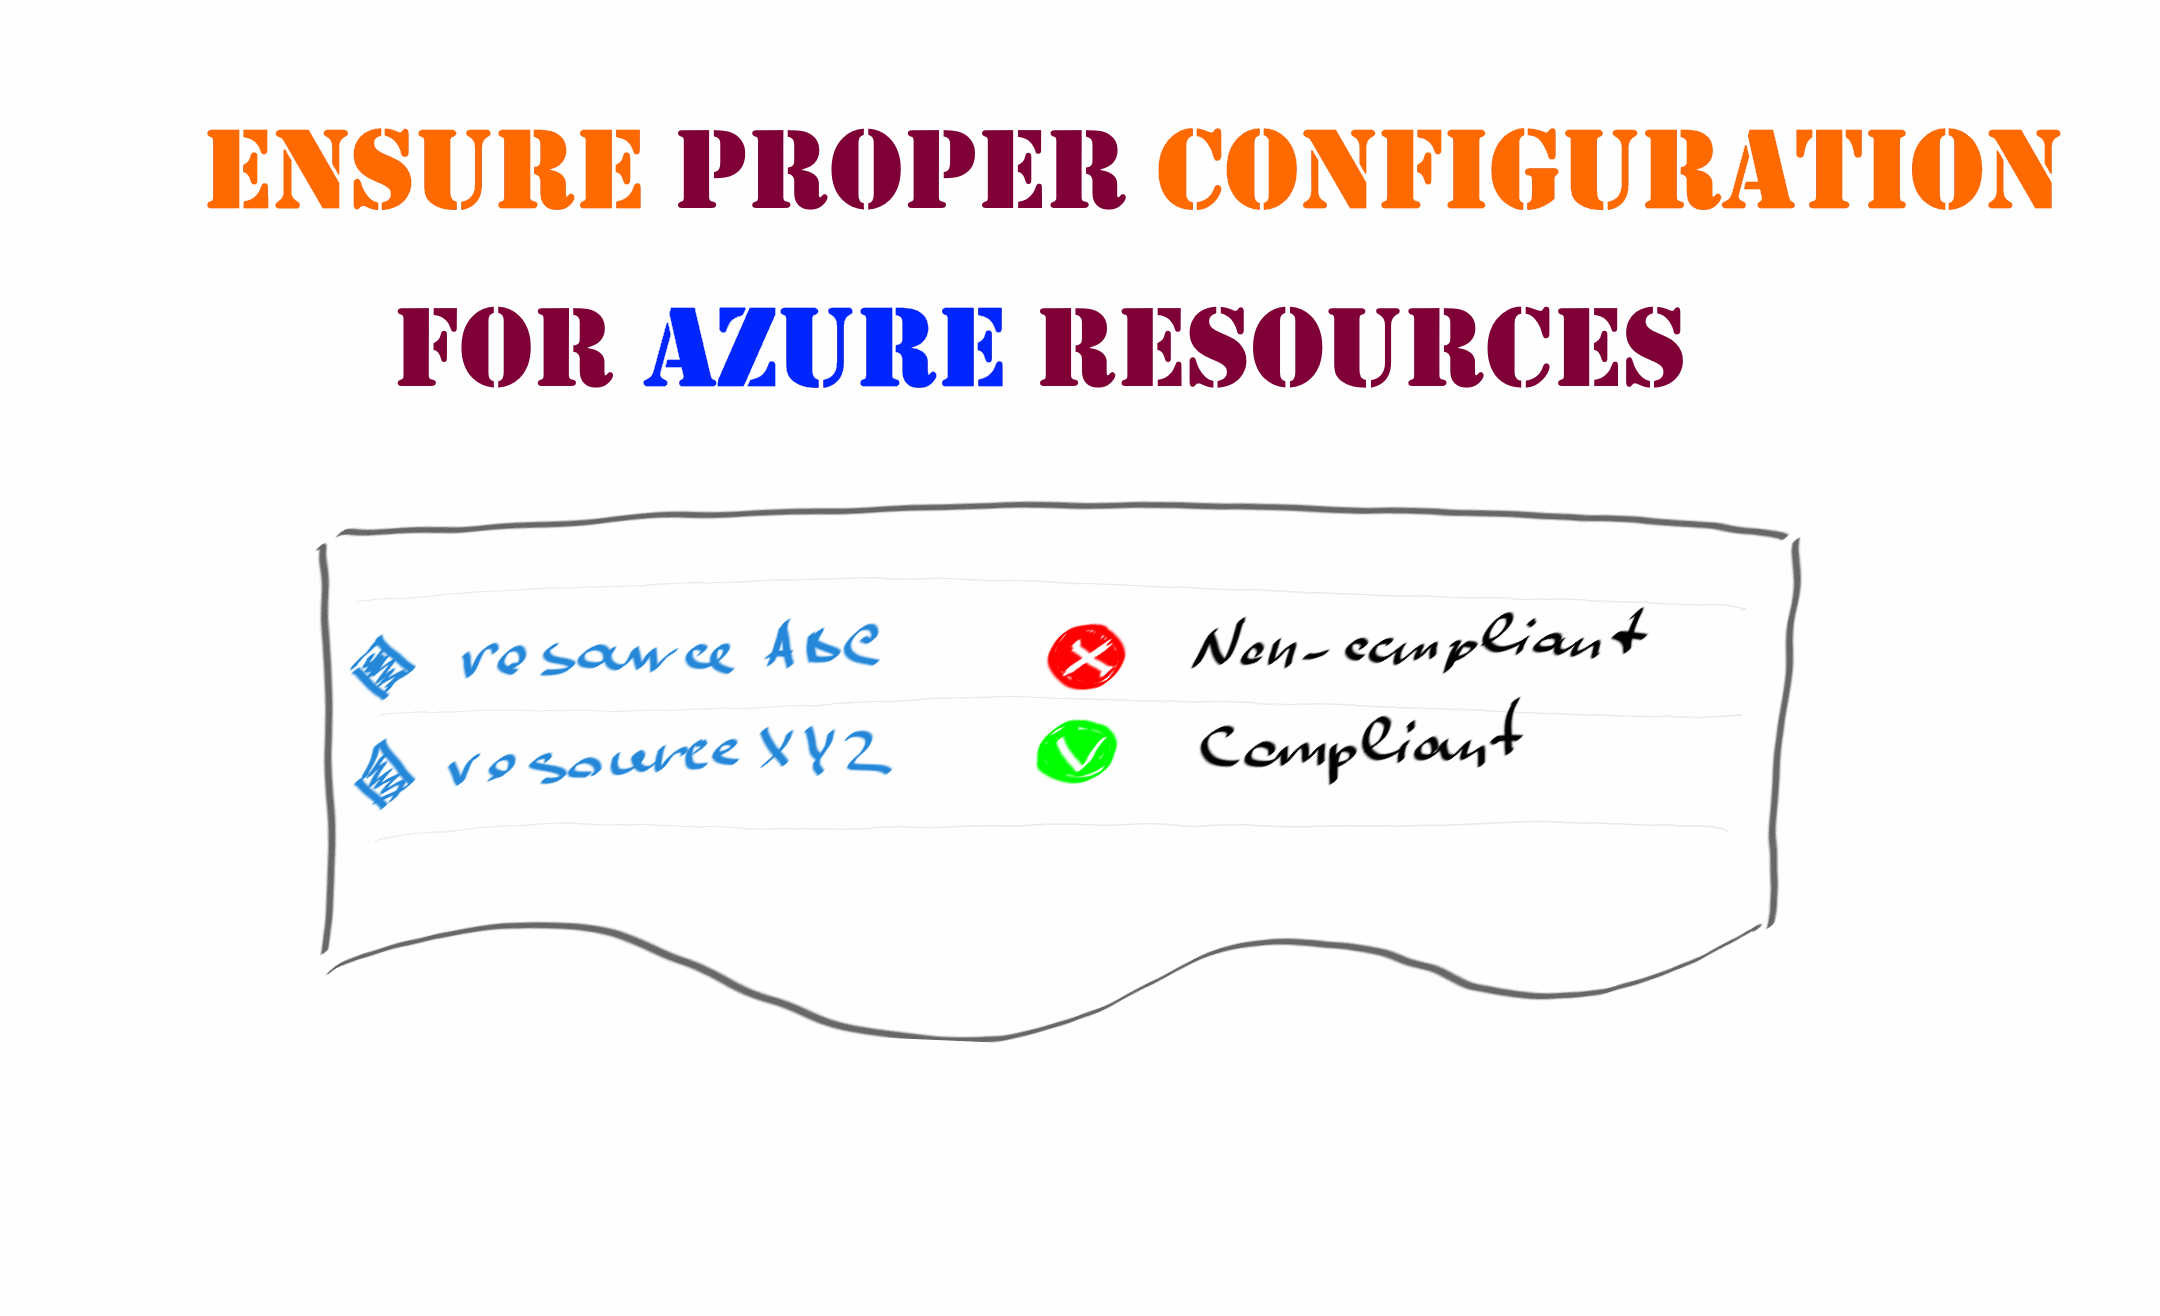 How to ensure proper configuration for your Azure resources